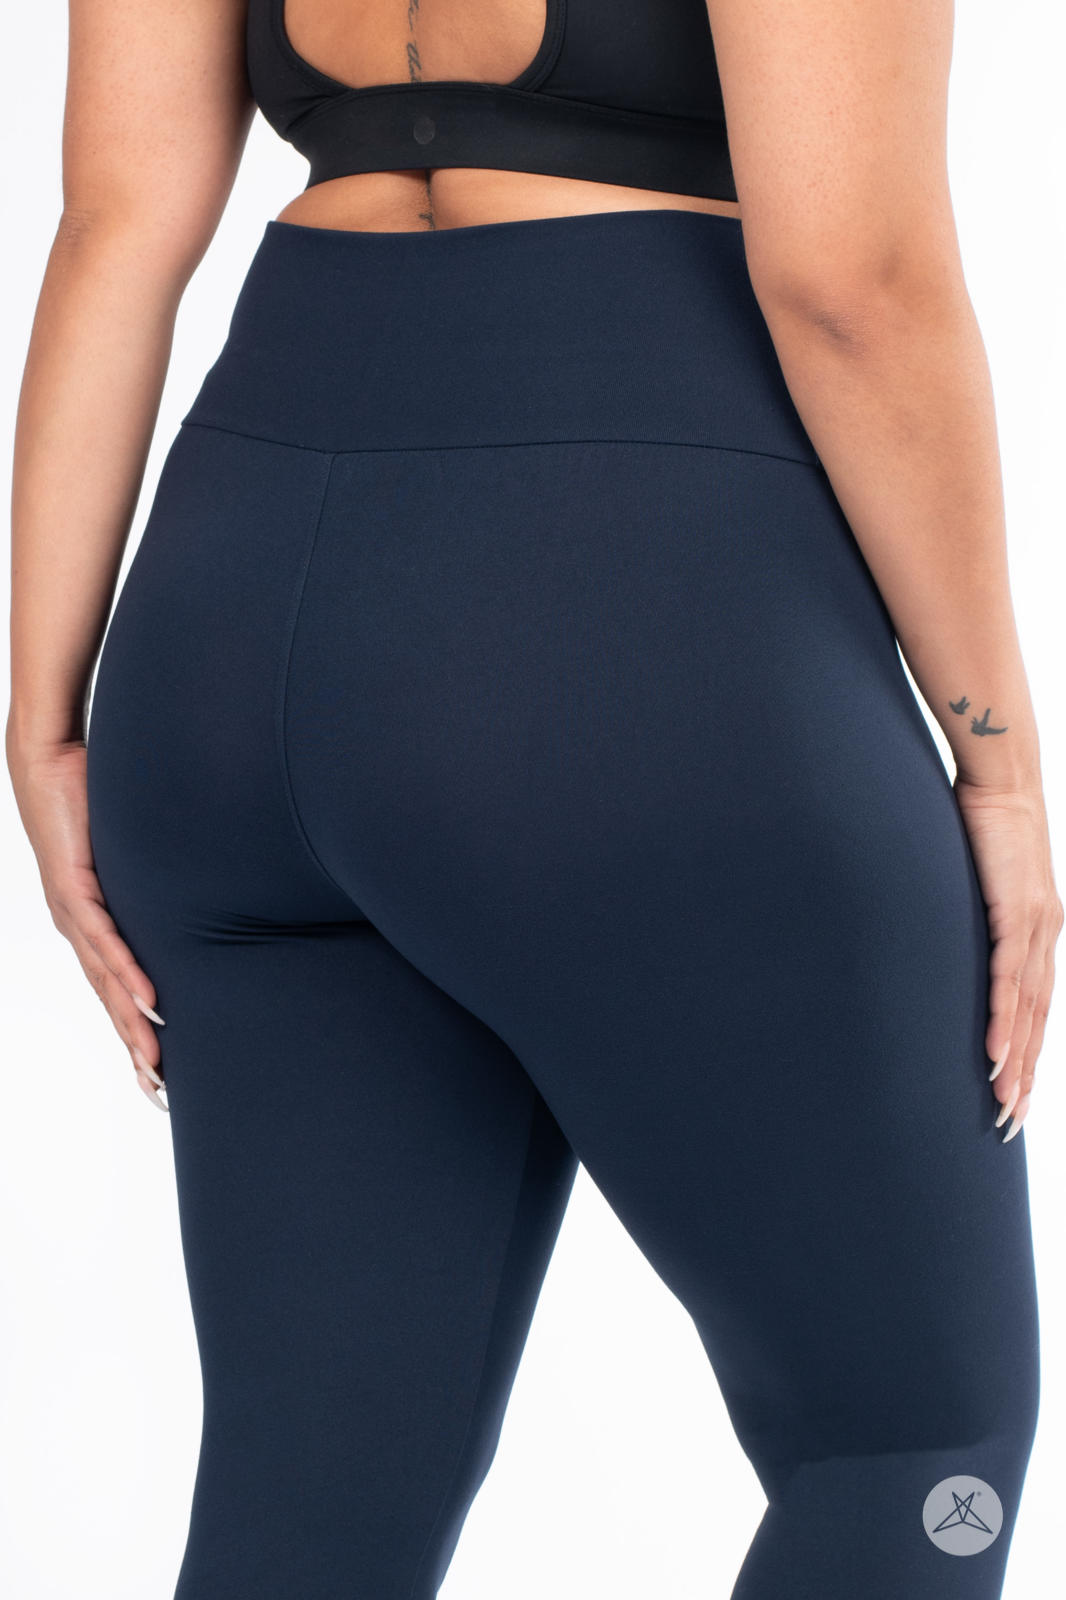 Spanx Assets by Seamless Denim Washed Leggings XL - $35 - From